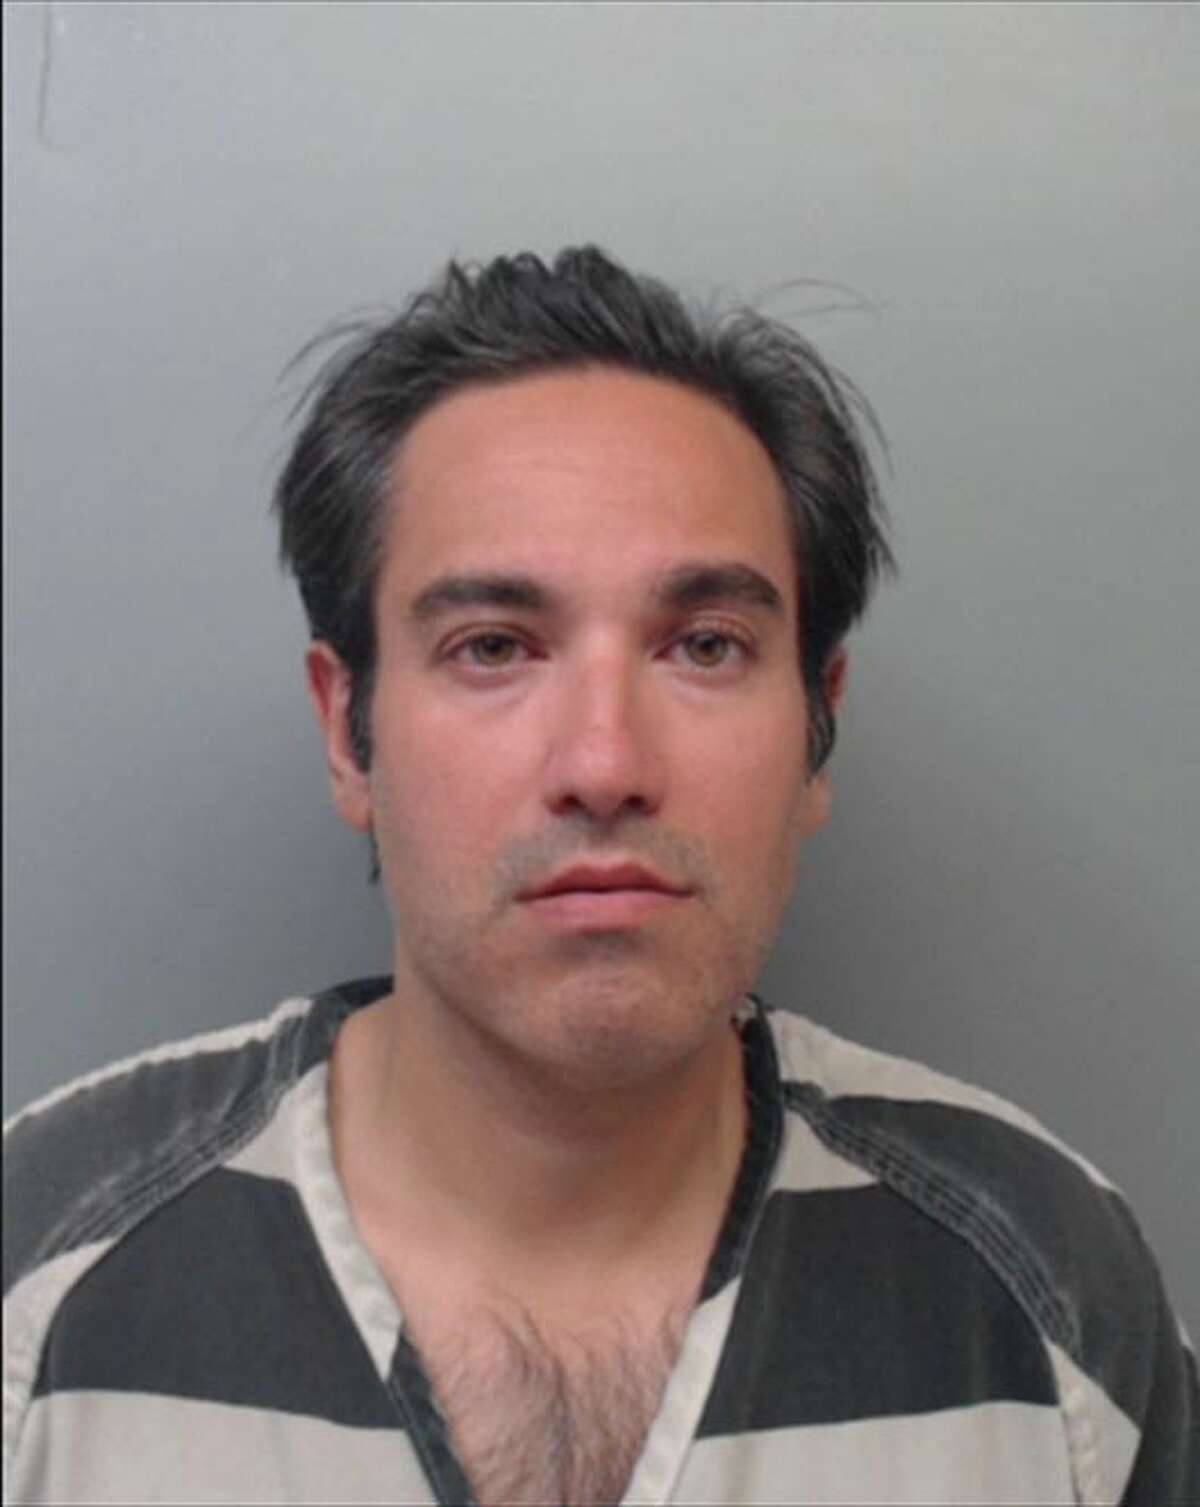 Oscar Ignacio Flores, 39, was charged with stalking and criminal trespass.